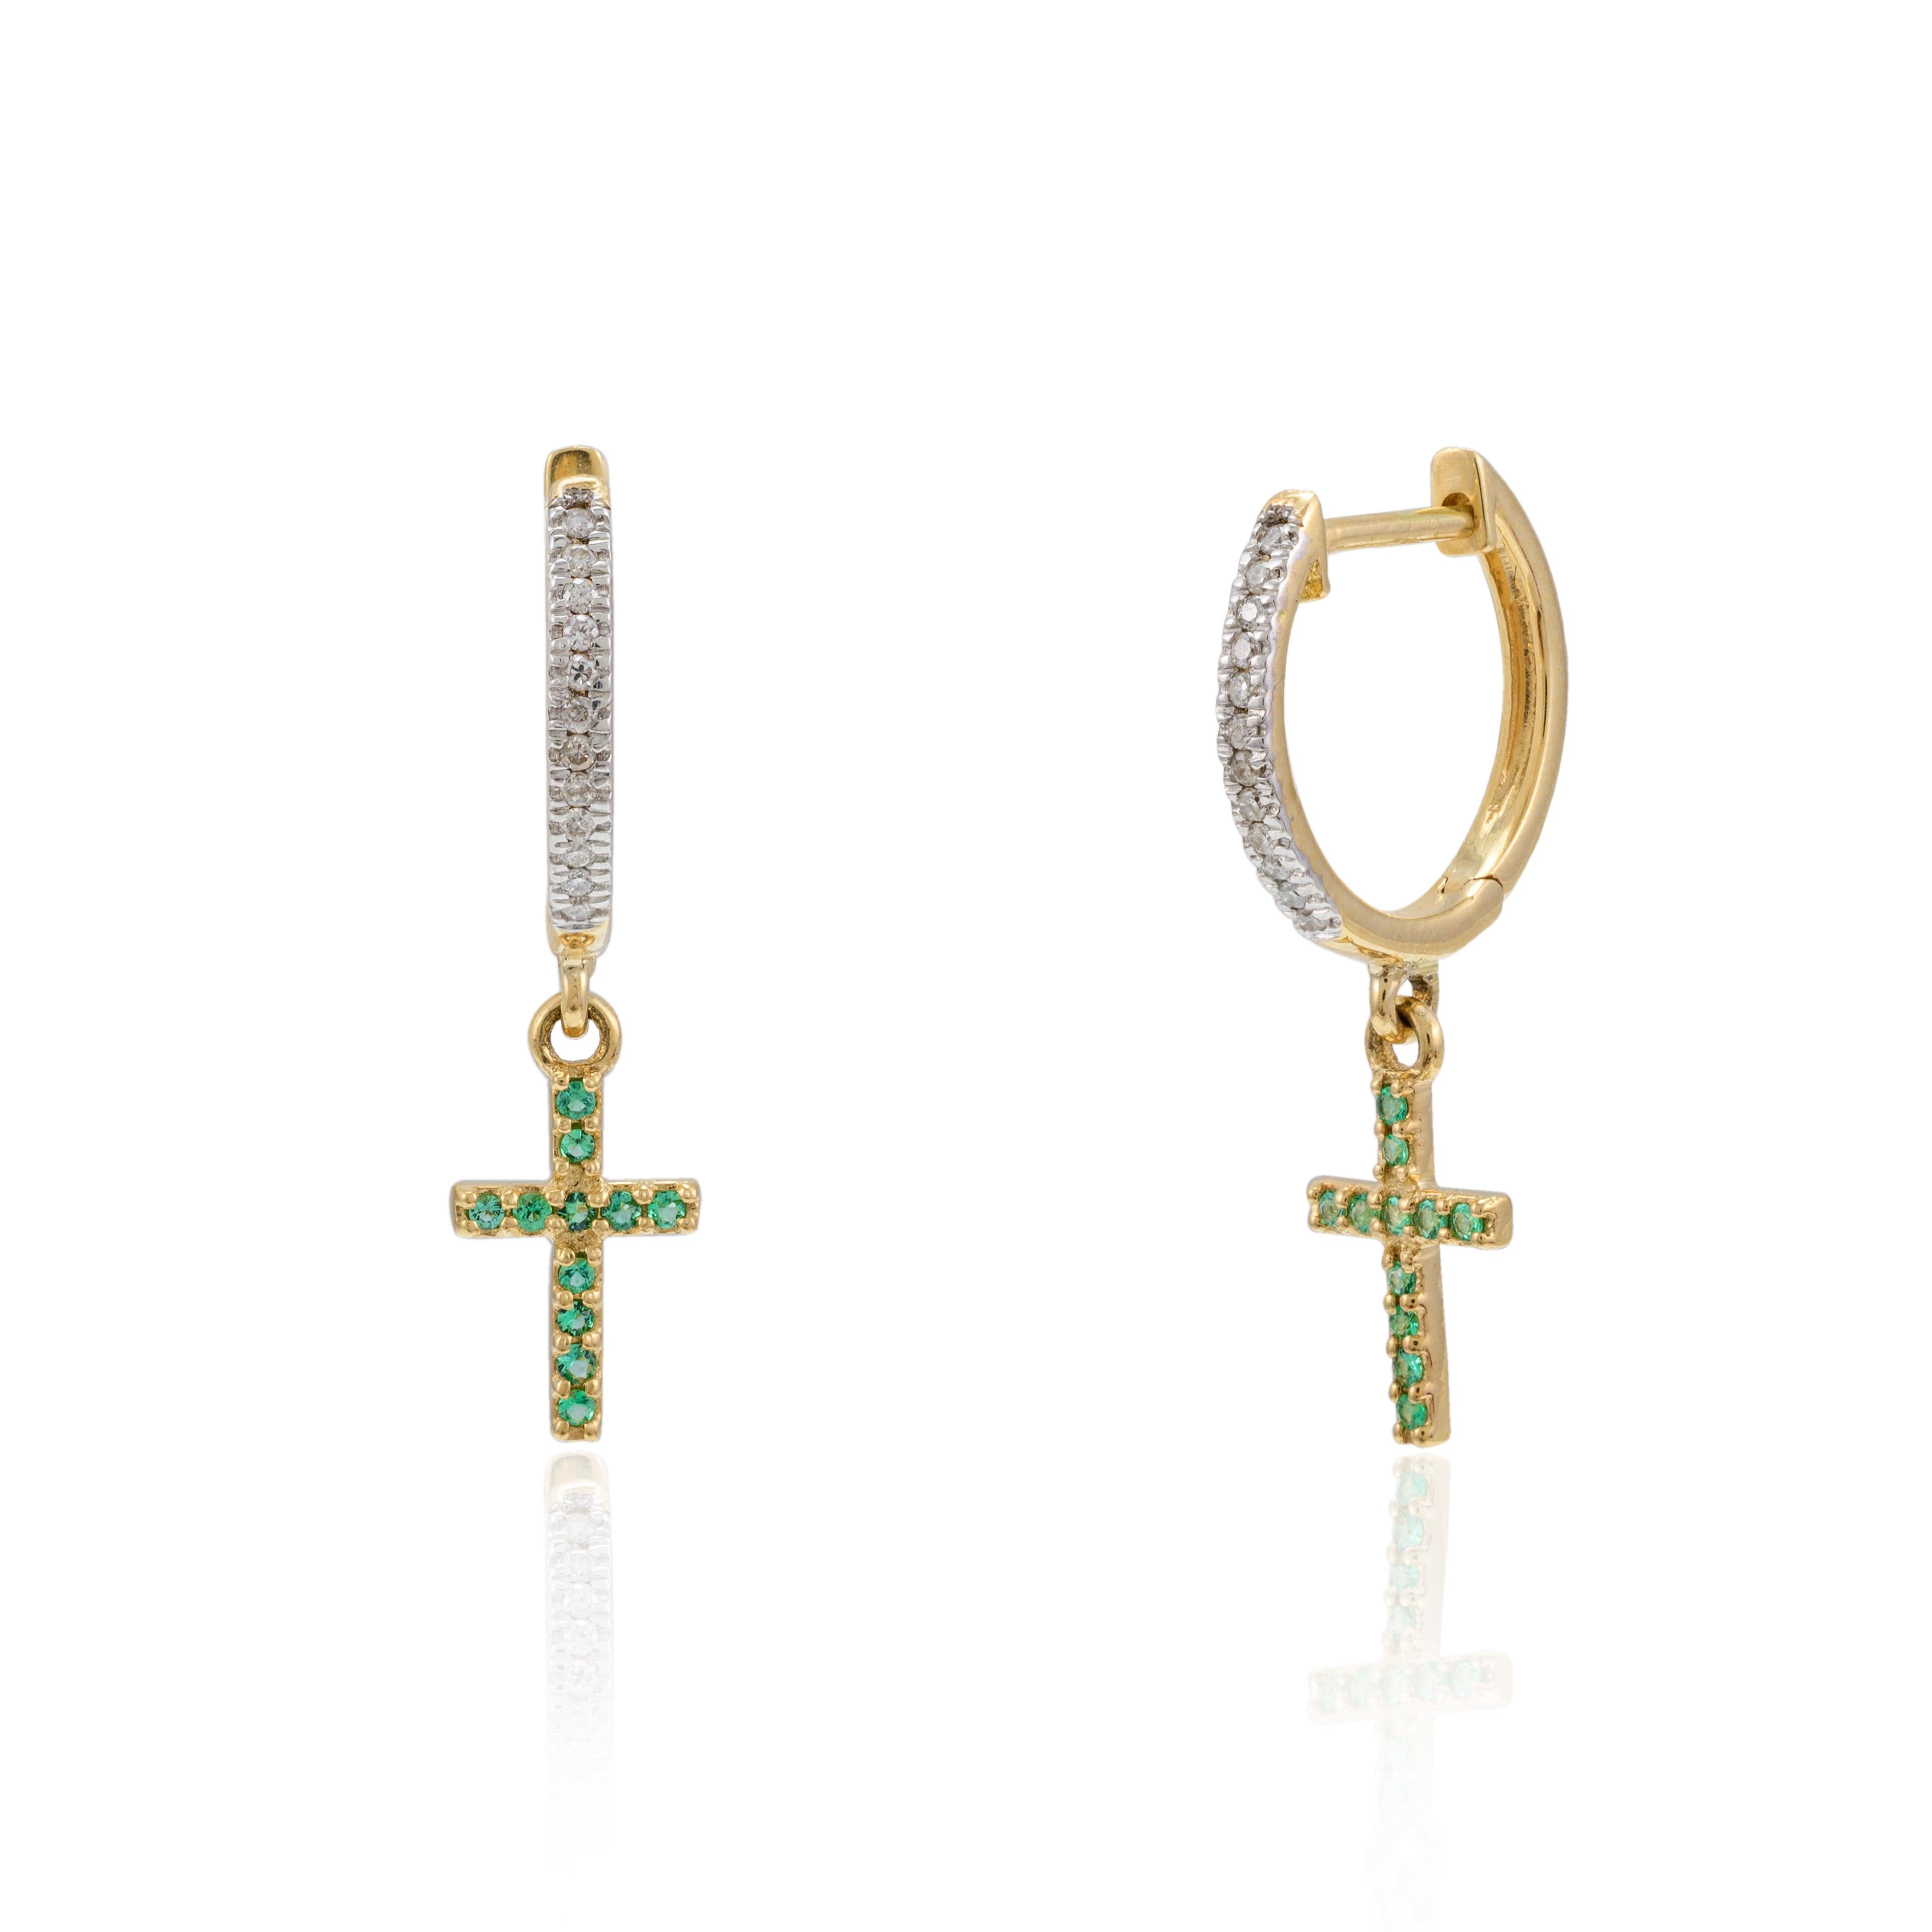 Natural Emerald Cross Dangle Hoop Earrings with Diamonds in 18K Gold to make a statement with your look. You shall need stud earrings to make a statement with your look. These earrings create a sparkling, luxurious look featuring round cut